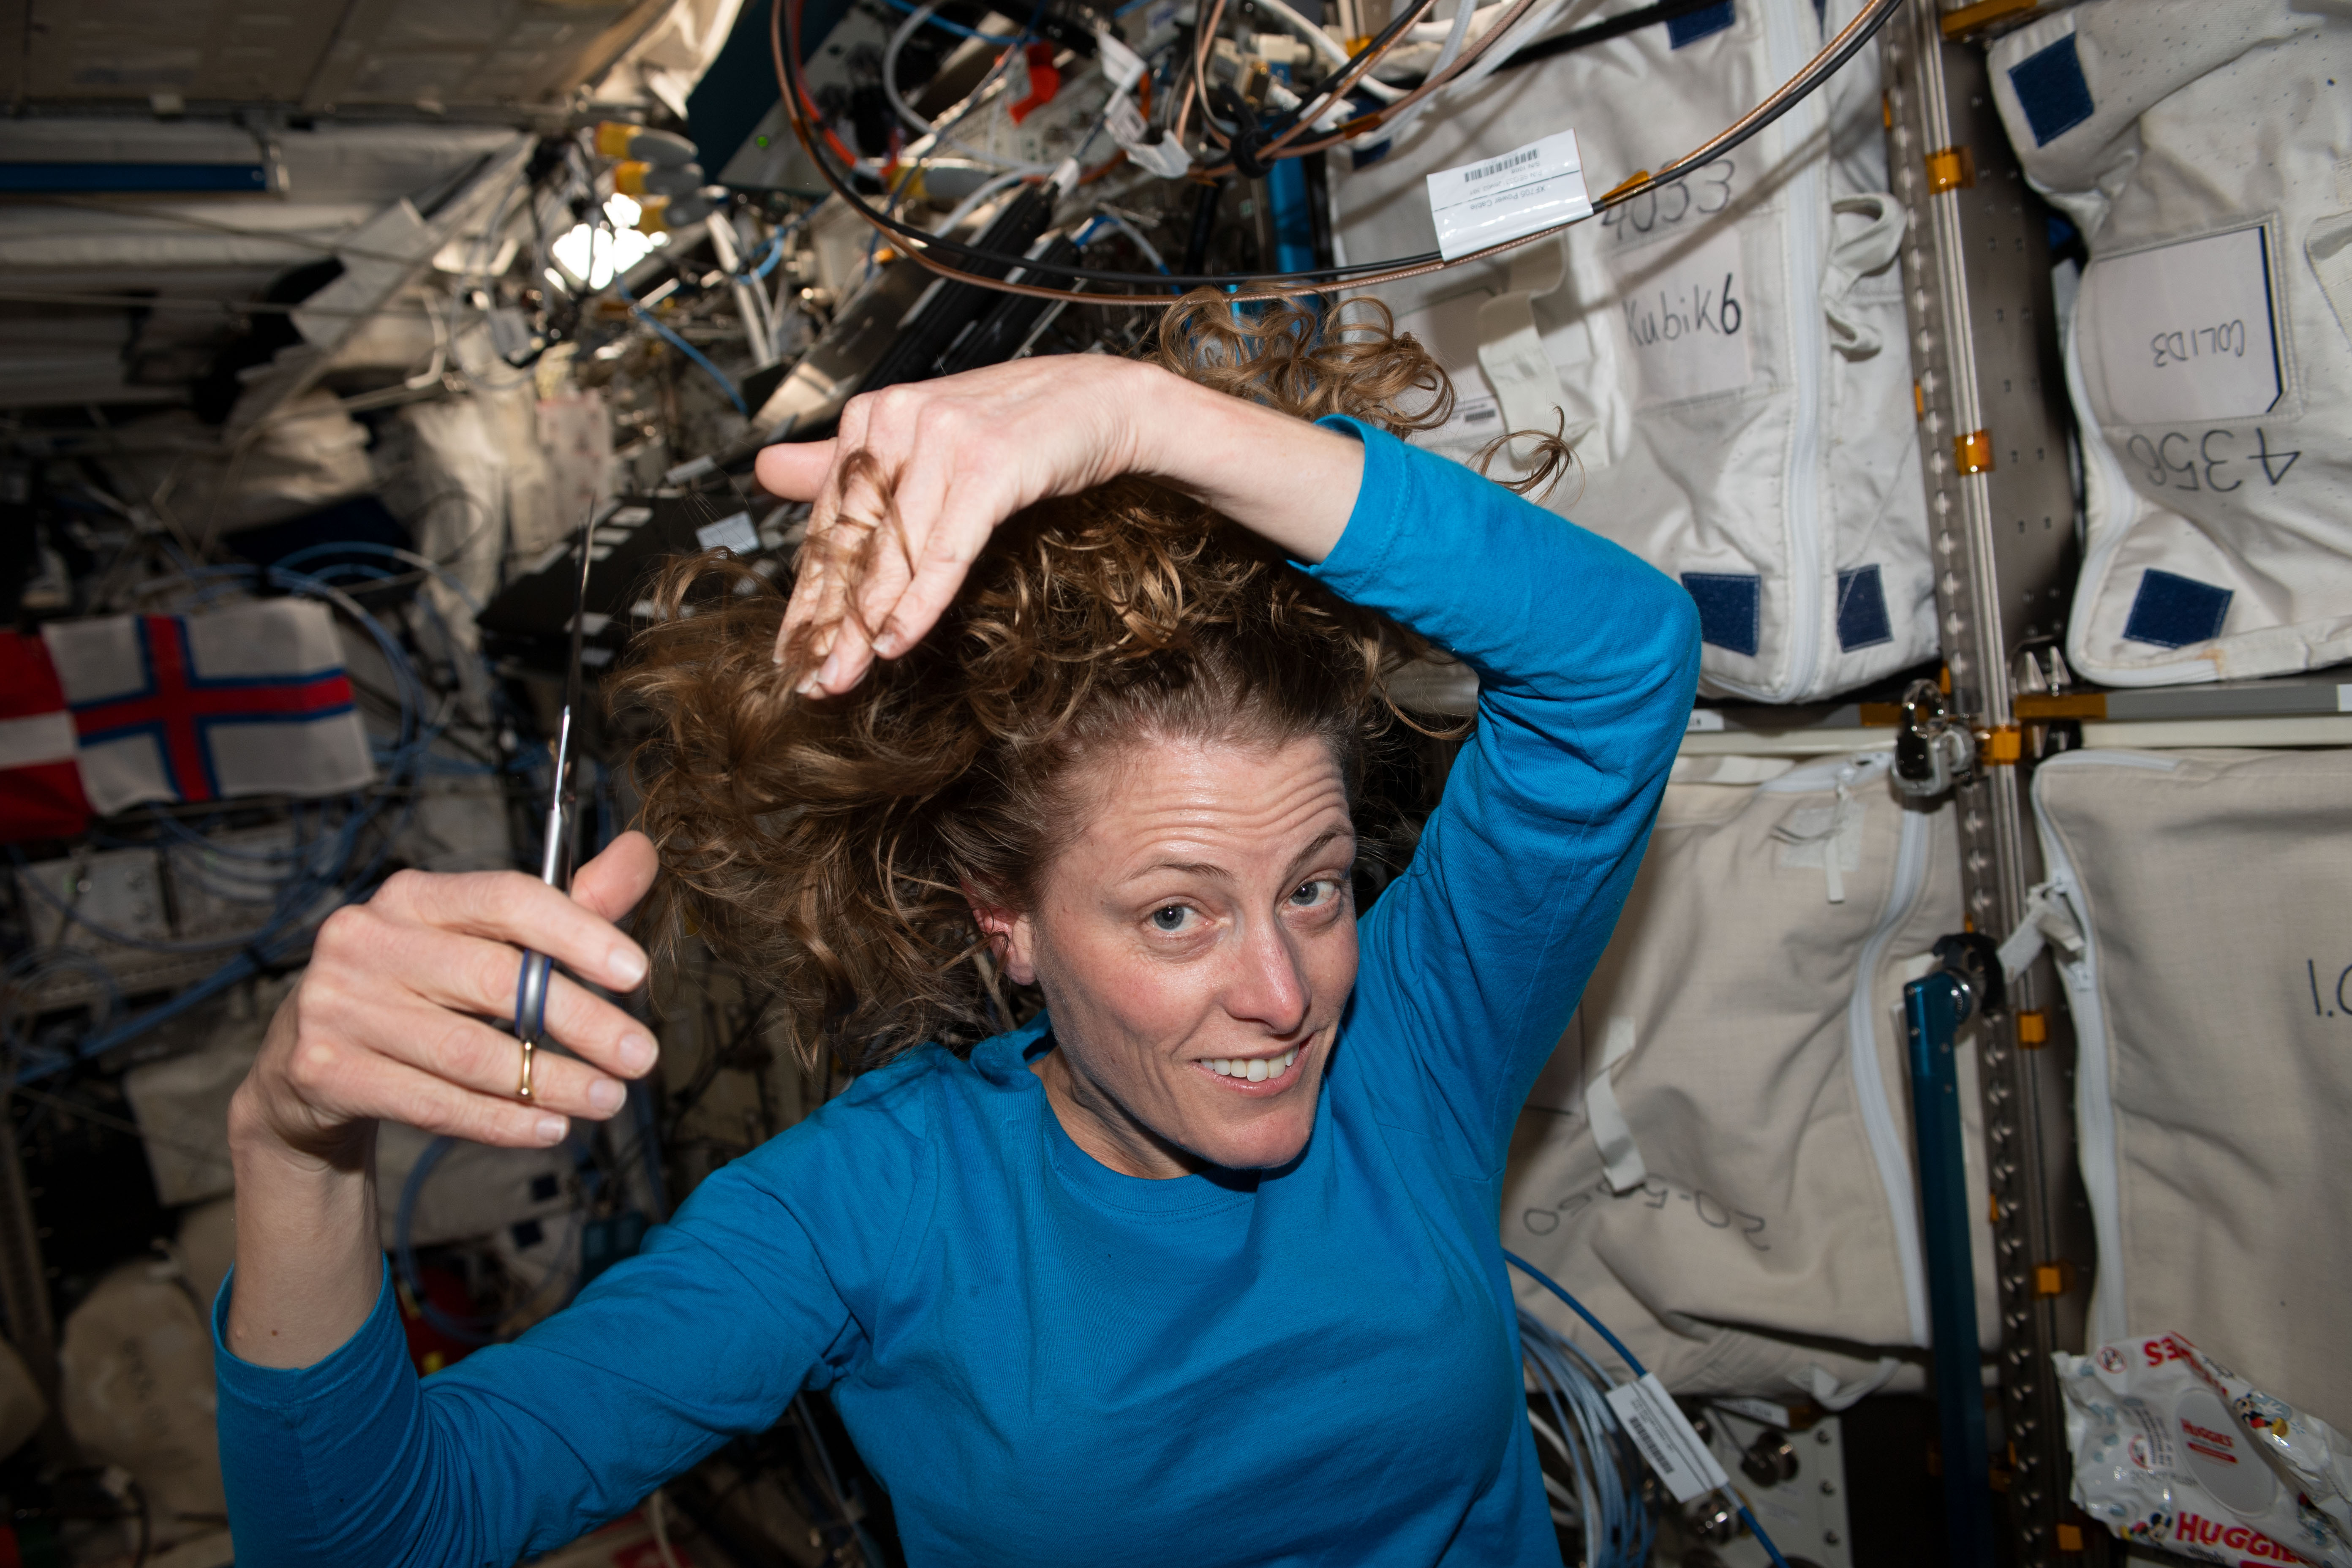 NASA astronaut and Expedition 70 Flight Engineer Loral O'Hara is pictured trimming her hair aboard the International Space Station.